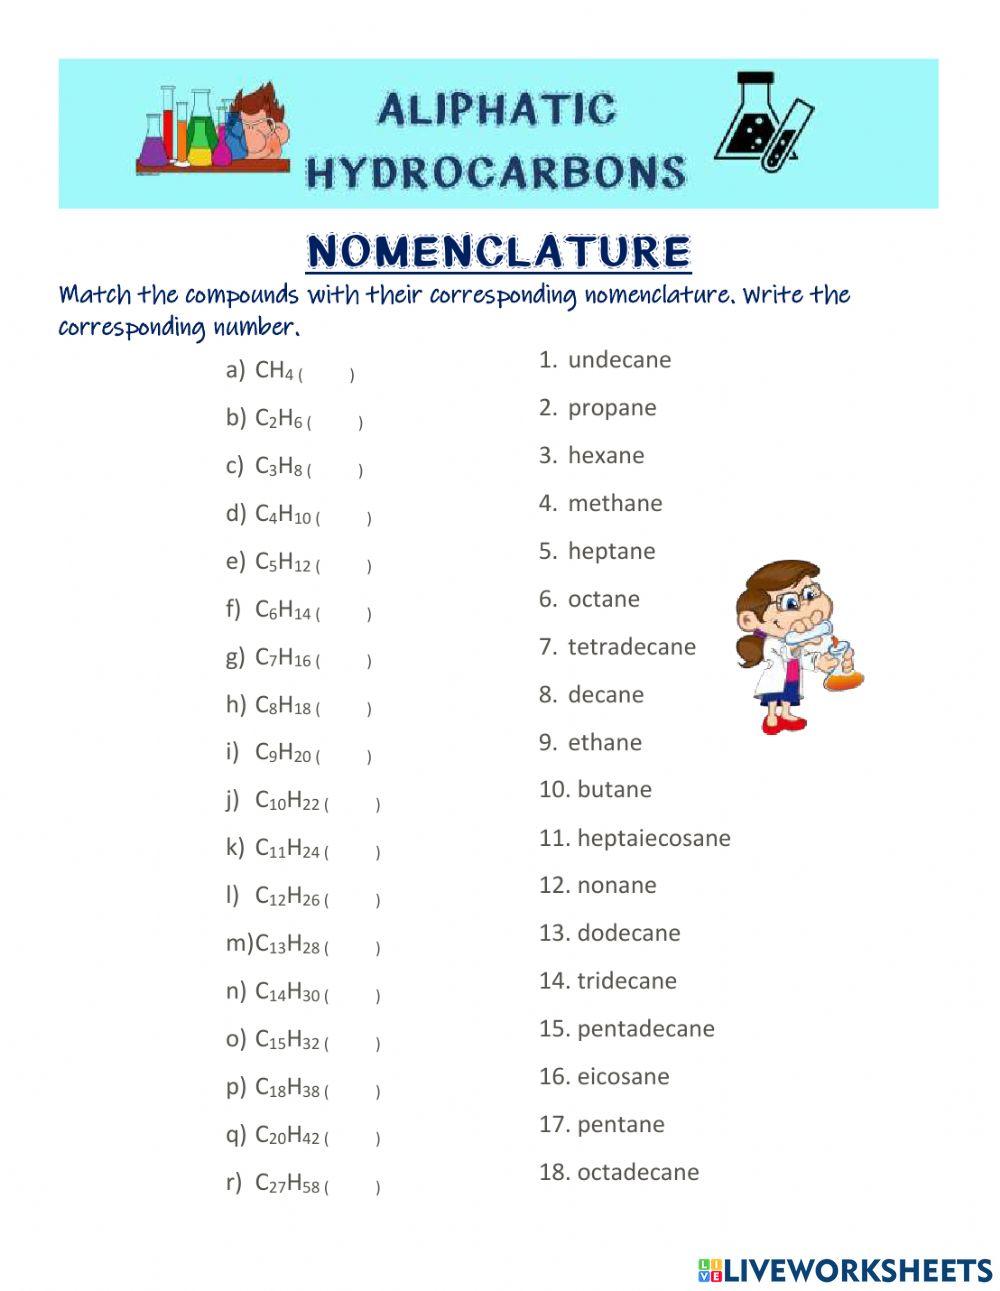 Aliphatic hydrocarbons NOMENCLATURE